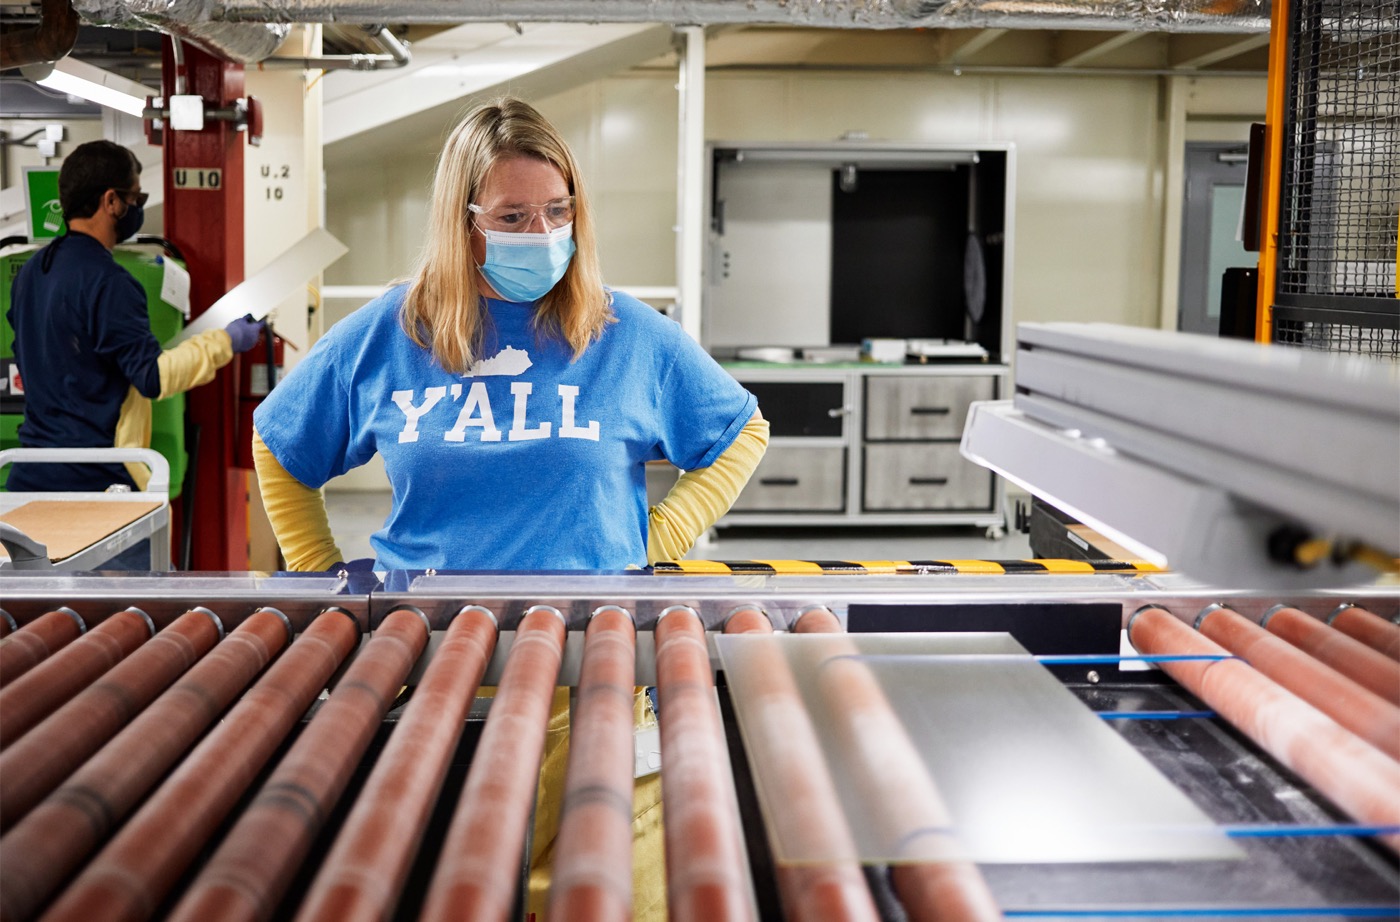  A woman in a blue shirt and face mask looks over a conveyor belt of glass sheets, with another person in the background wearing a white lab coat.